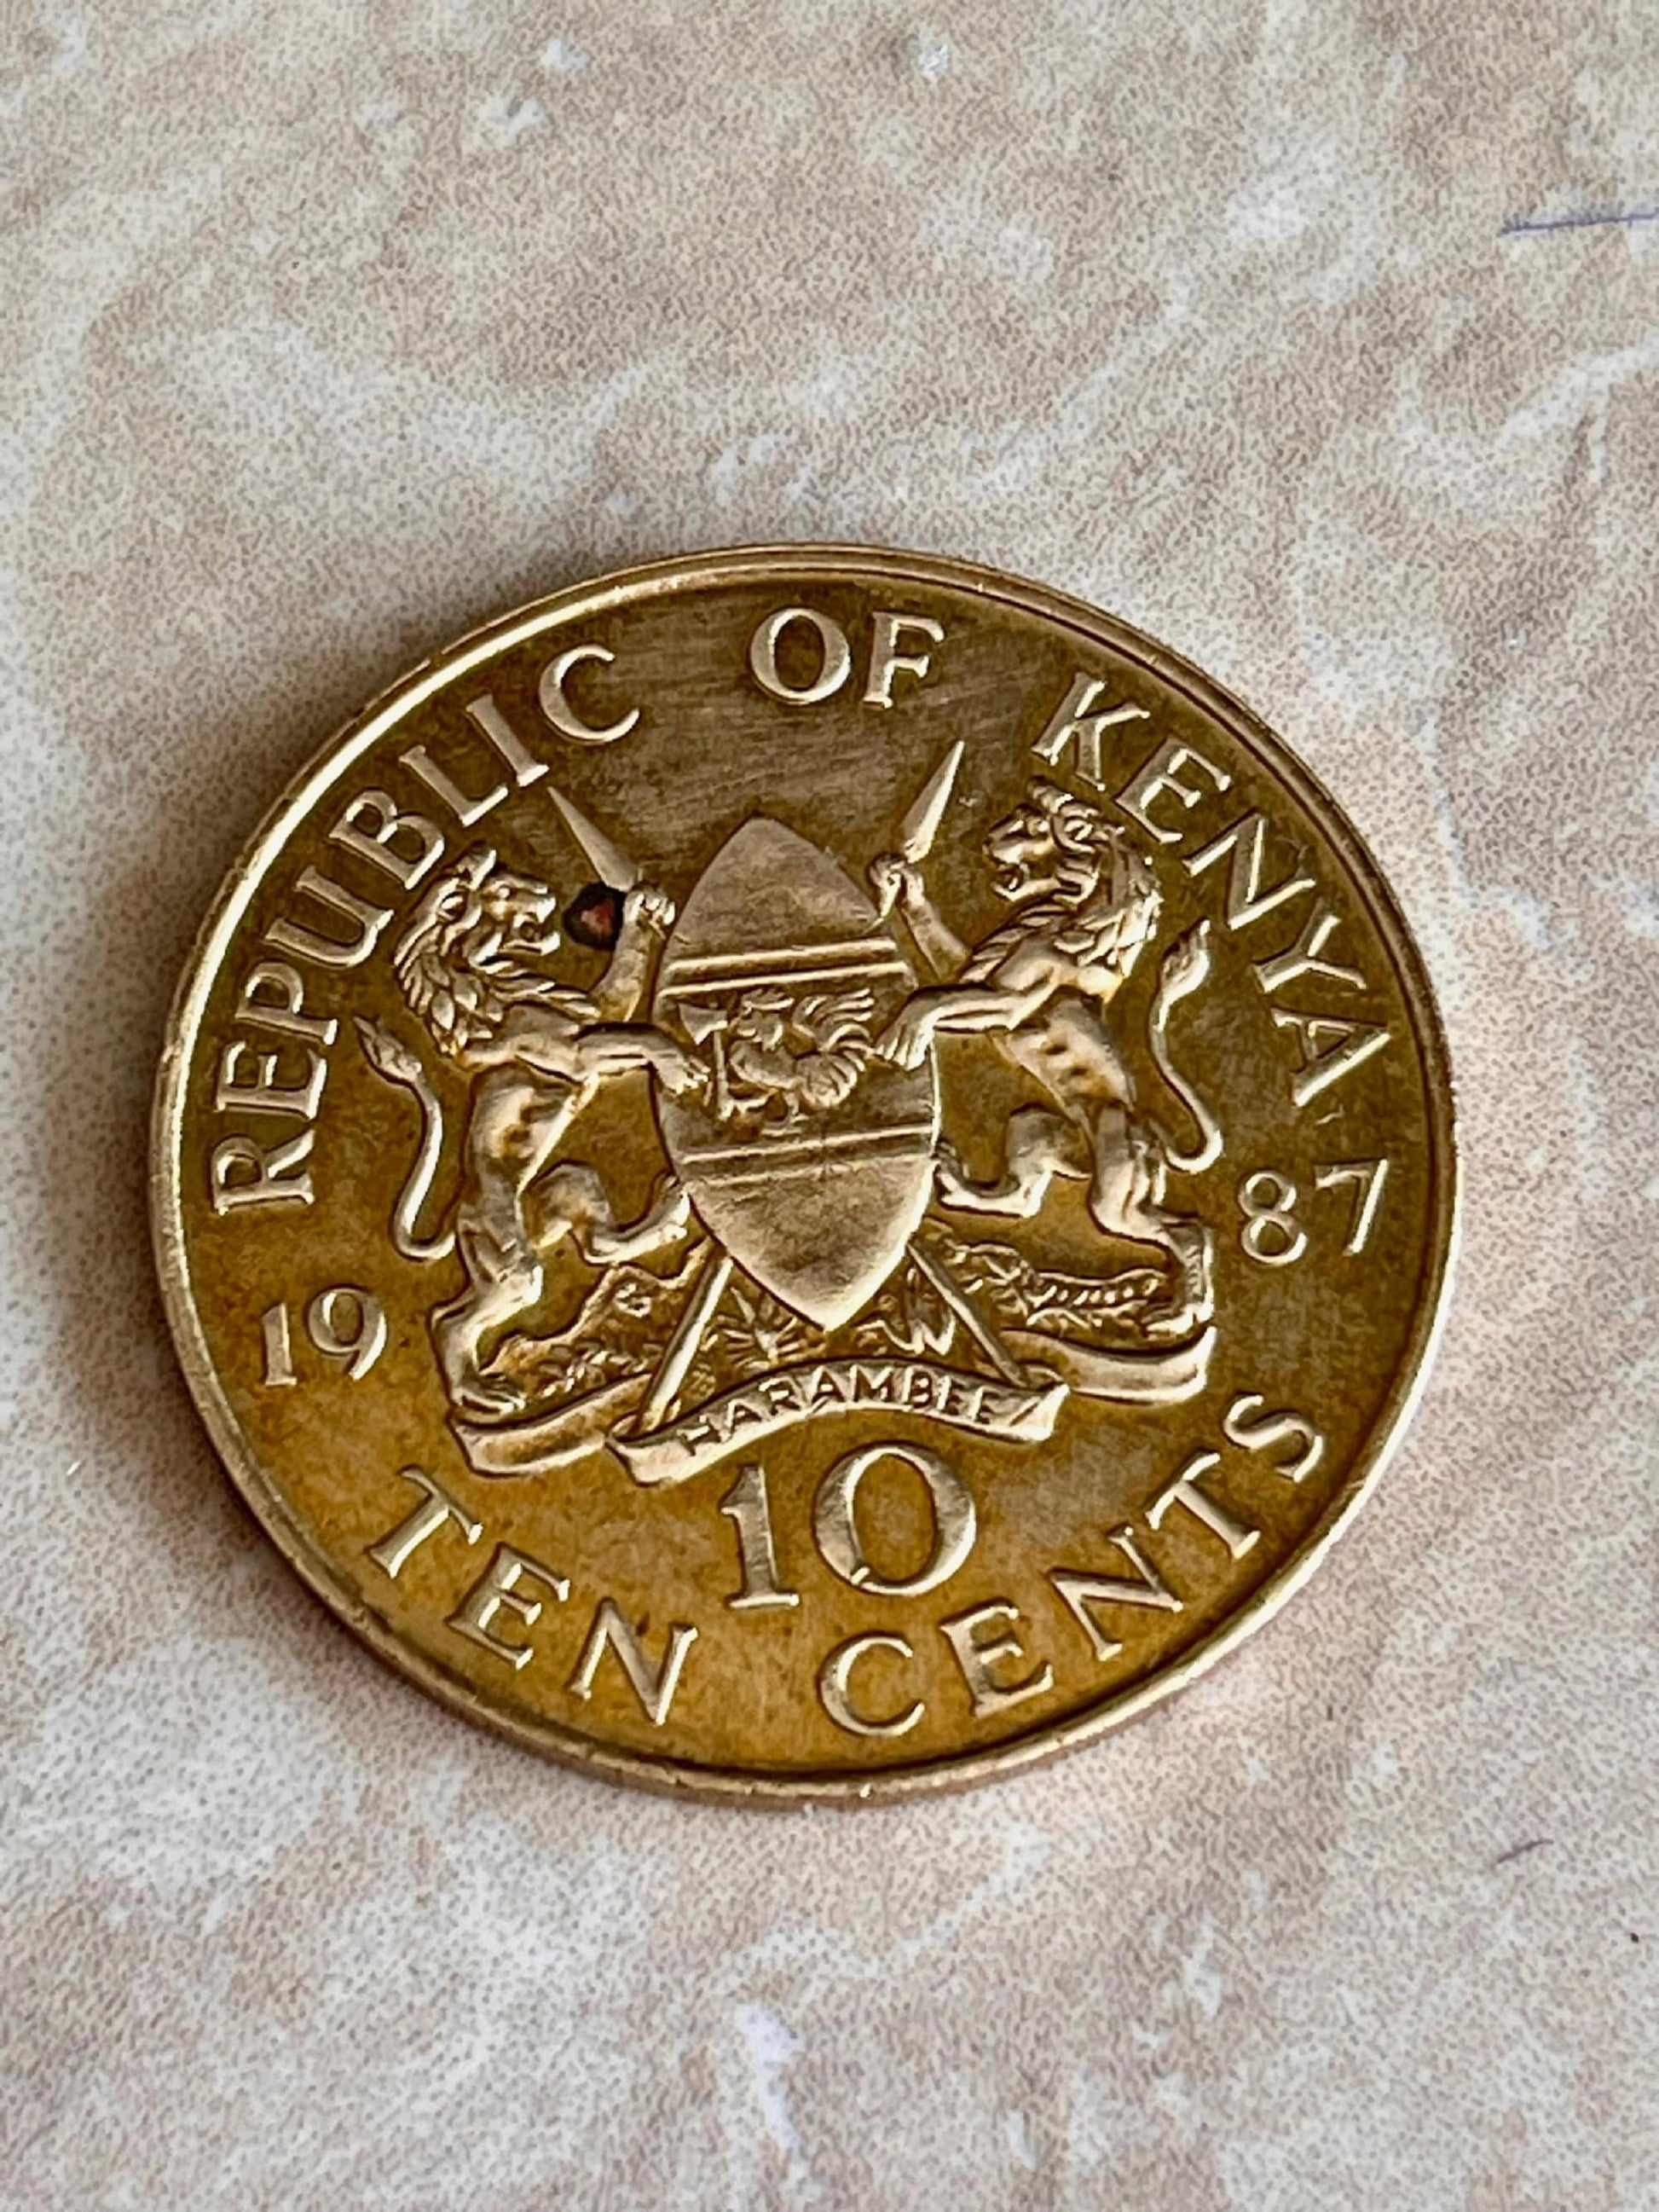 Kenya Coin Ring Vintage Kenyan 10 Cents Ring Handmade Personal Custom Ring Gift For Friend Coin Ring Gift For Him Her World Coin Collector